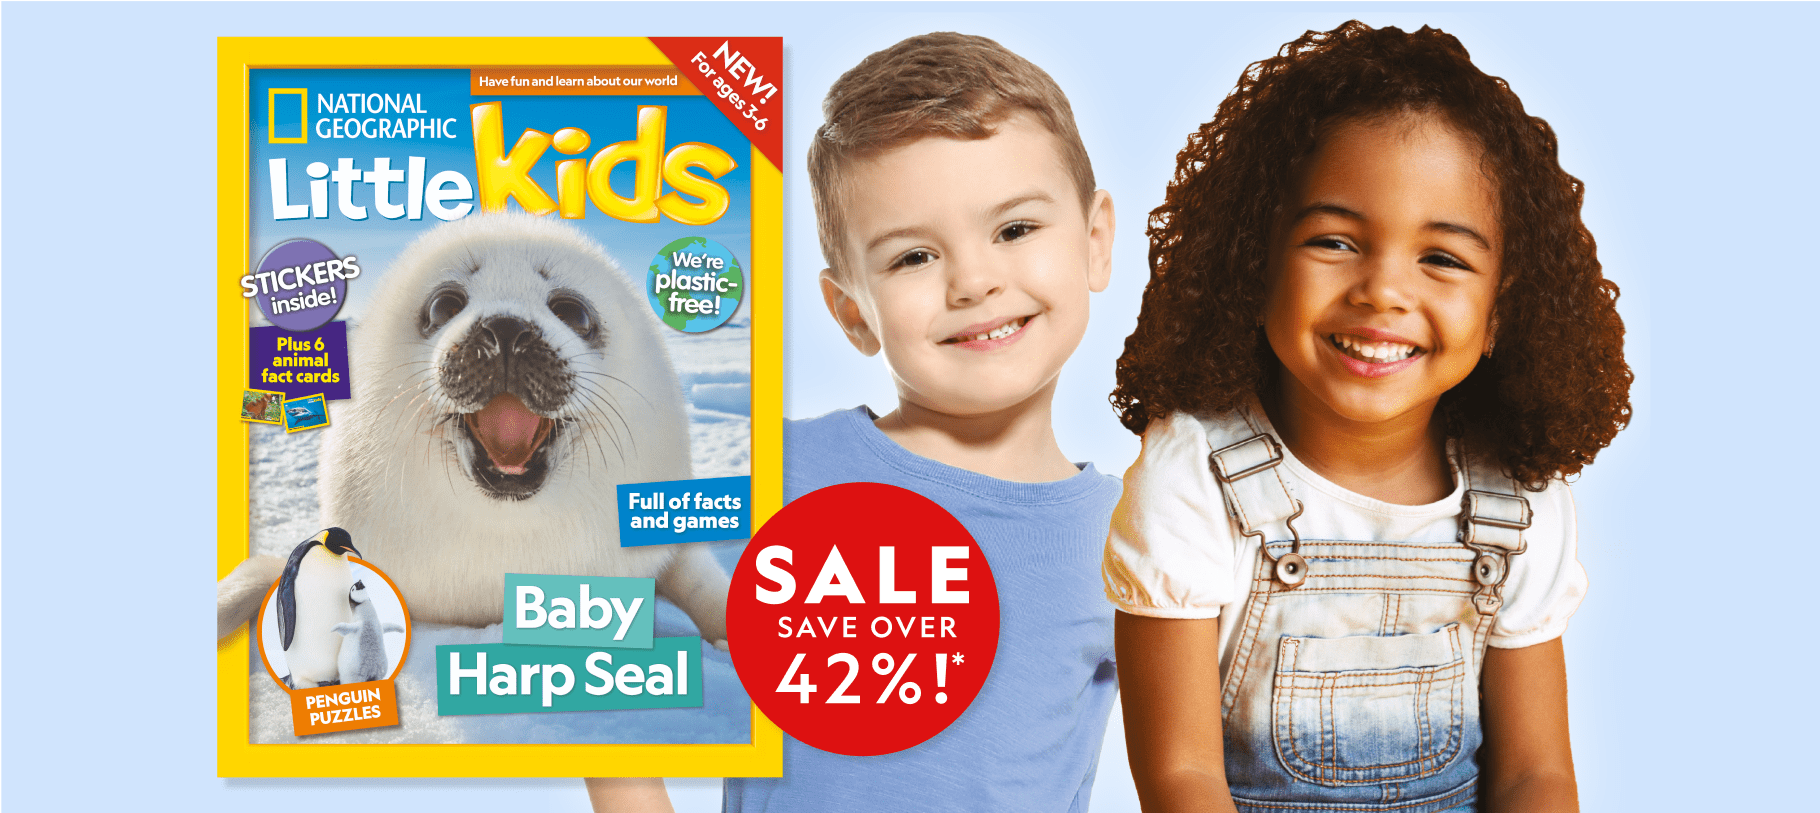 Nurture their love of learning<br/>
<span>with a National Geographic Little Kids subscription</span>